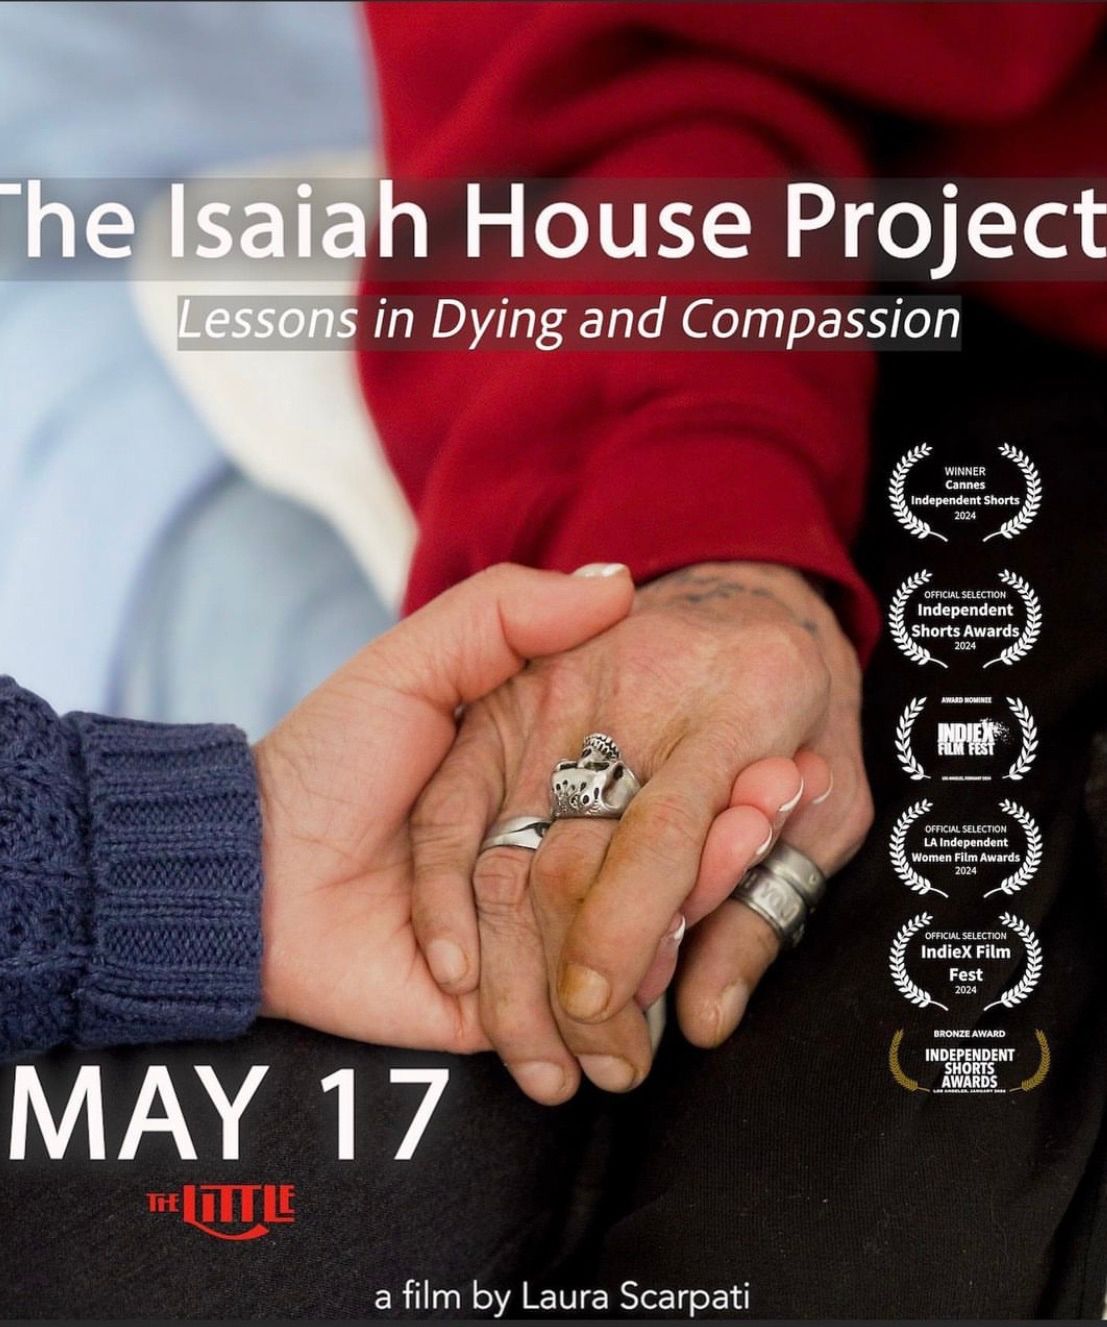 The Isaiah House Project: Documentary Screening